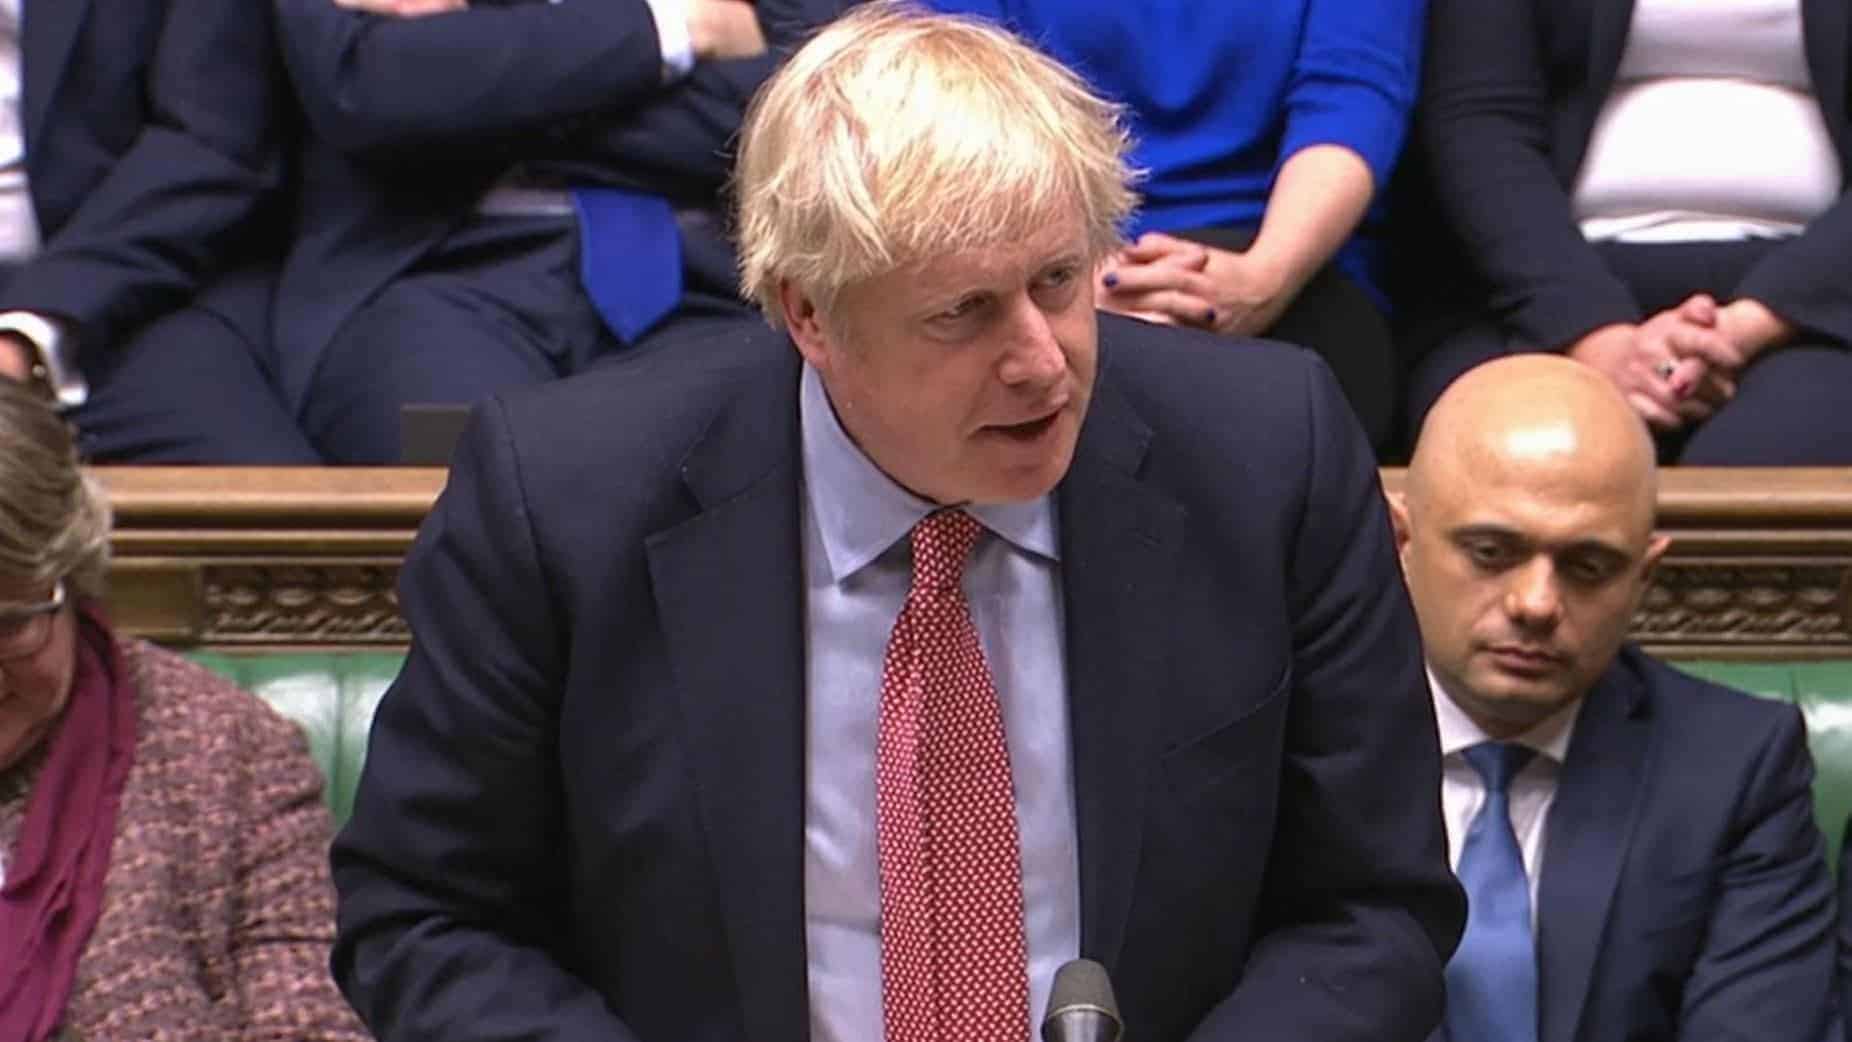 Boris Johnson says voters have returned “one of the best Parliaments this country has ever produced”